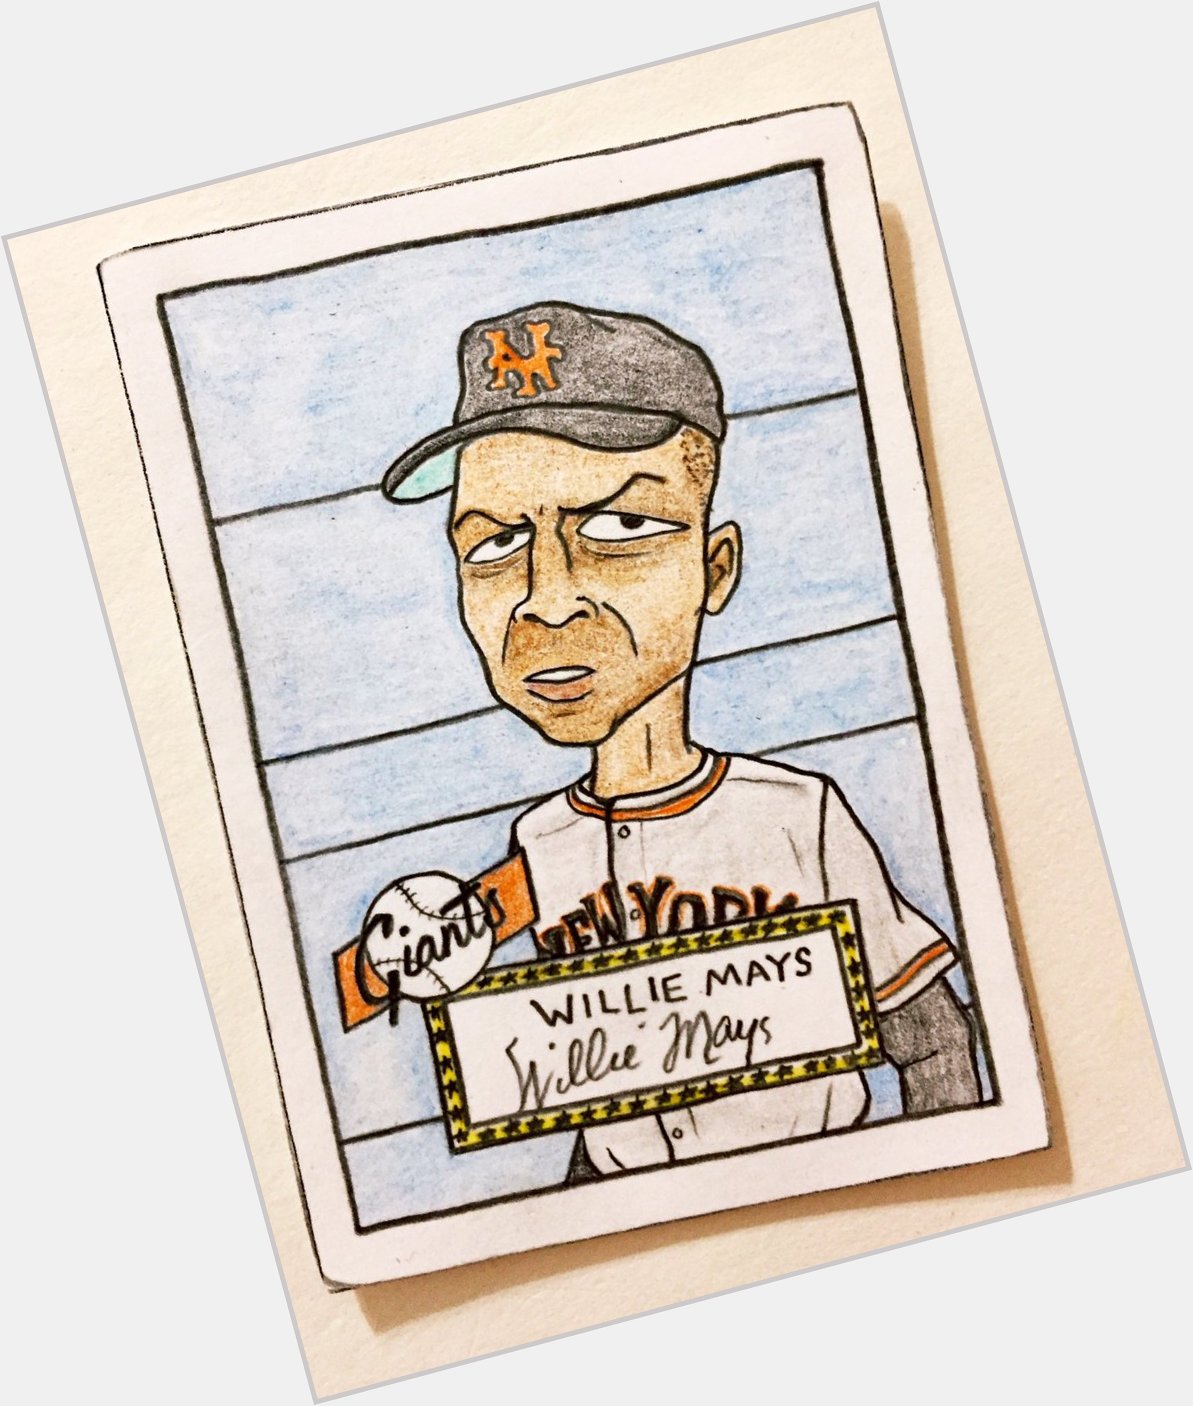 Wishing a very happy 89th birthday to Willie Mays! 